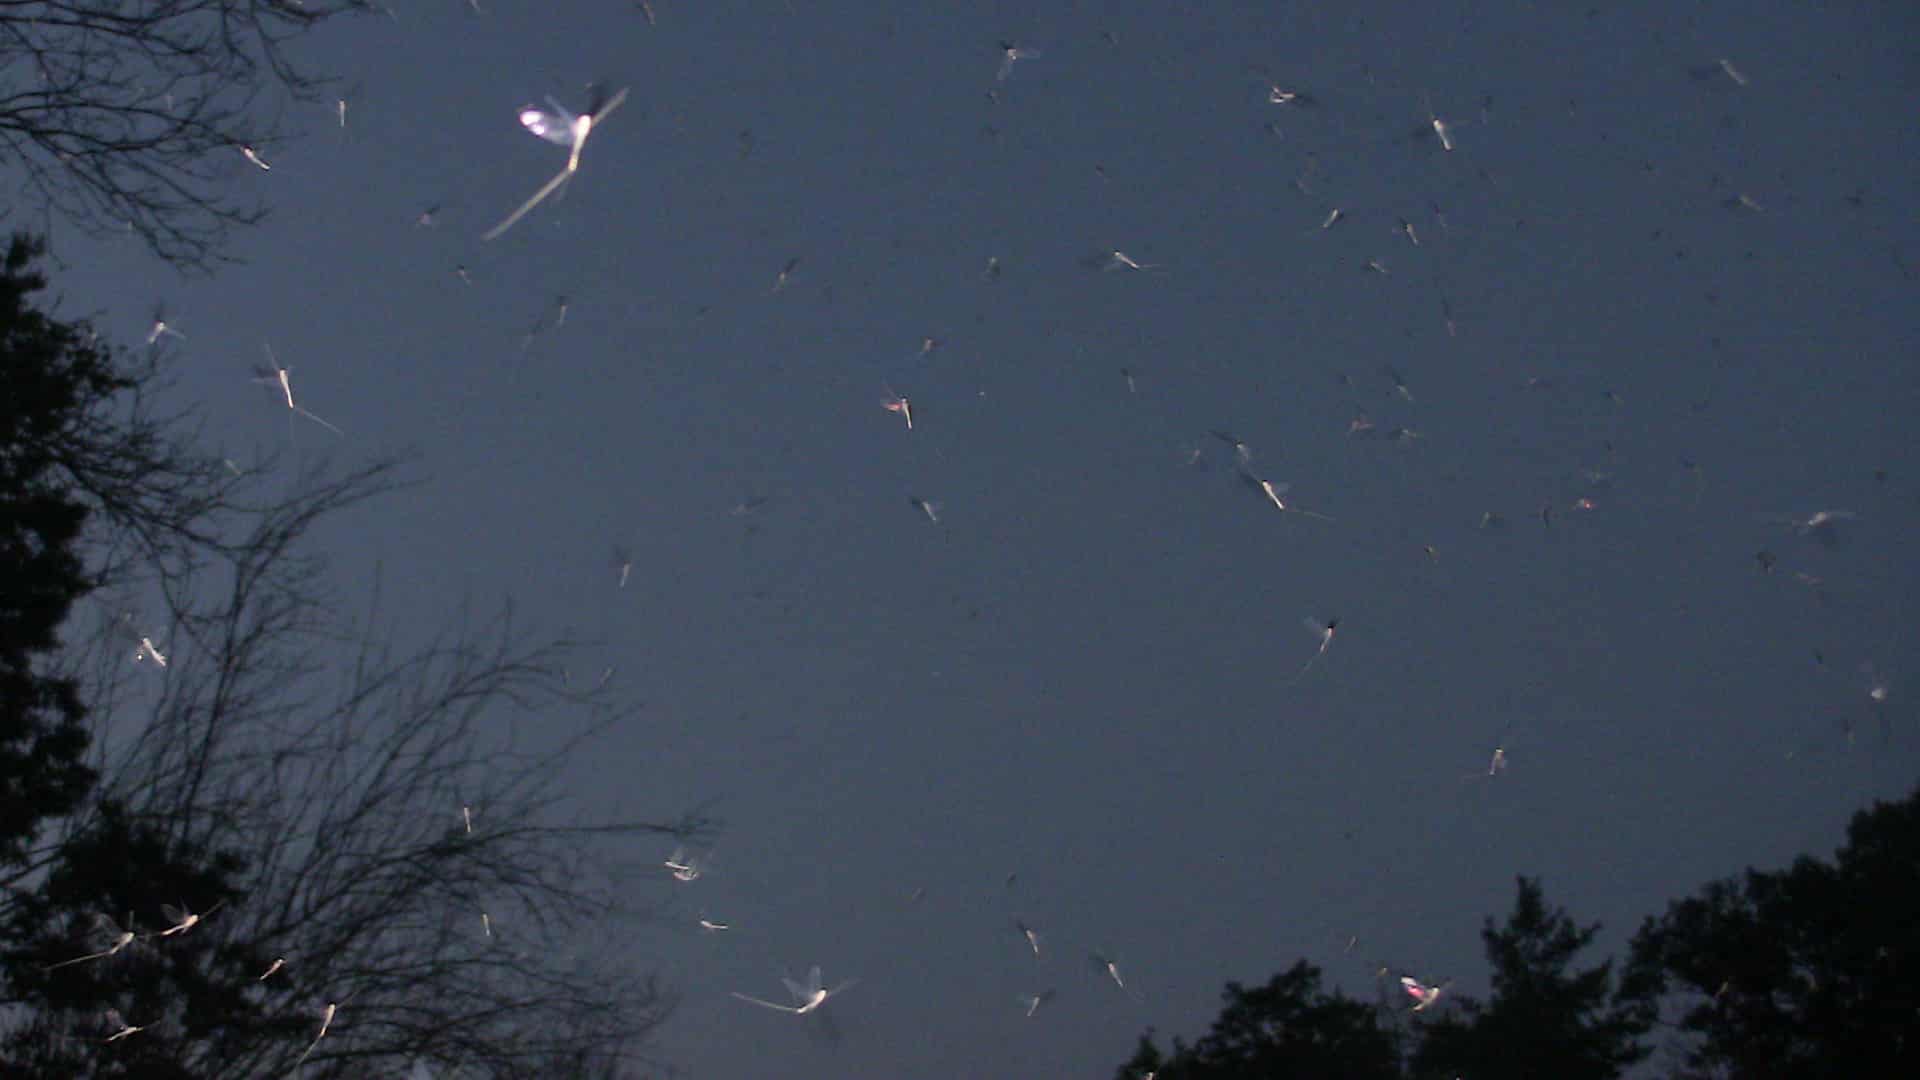 Thousands of hex mayflies fill the air above the water